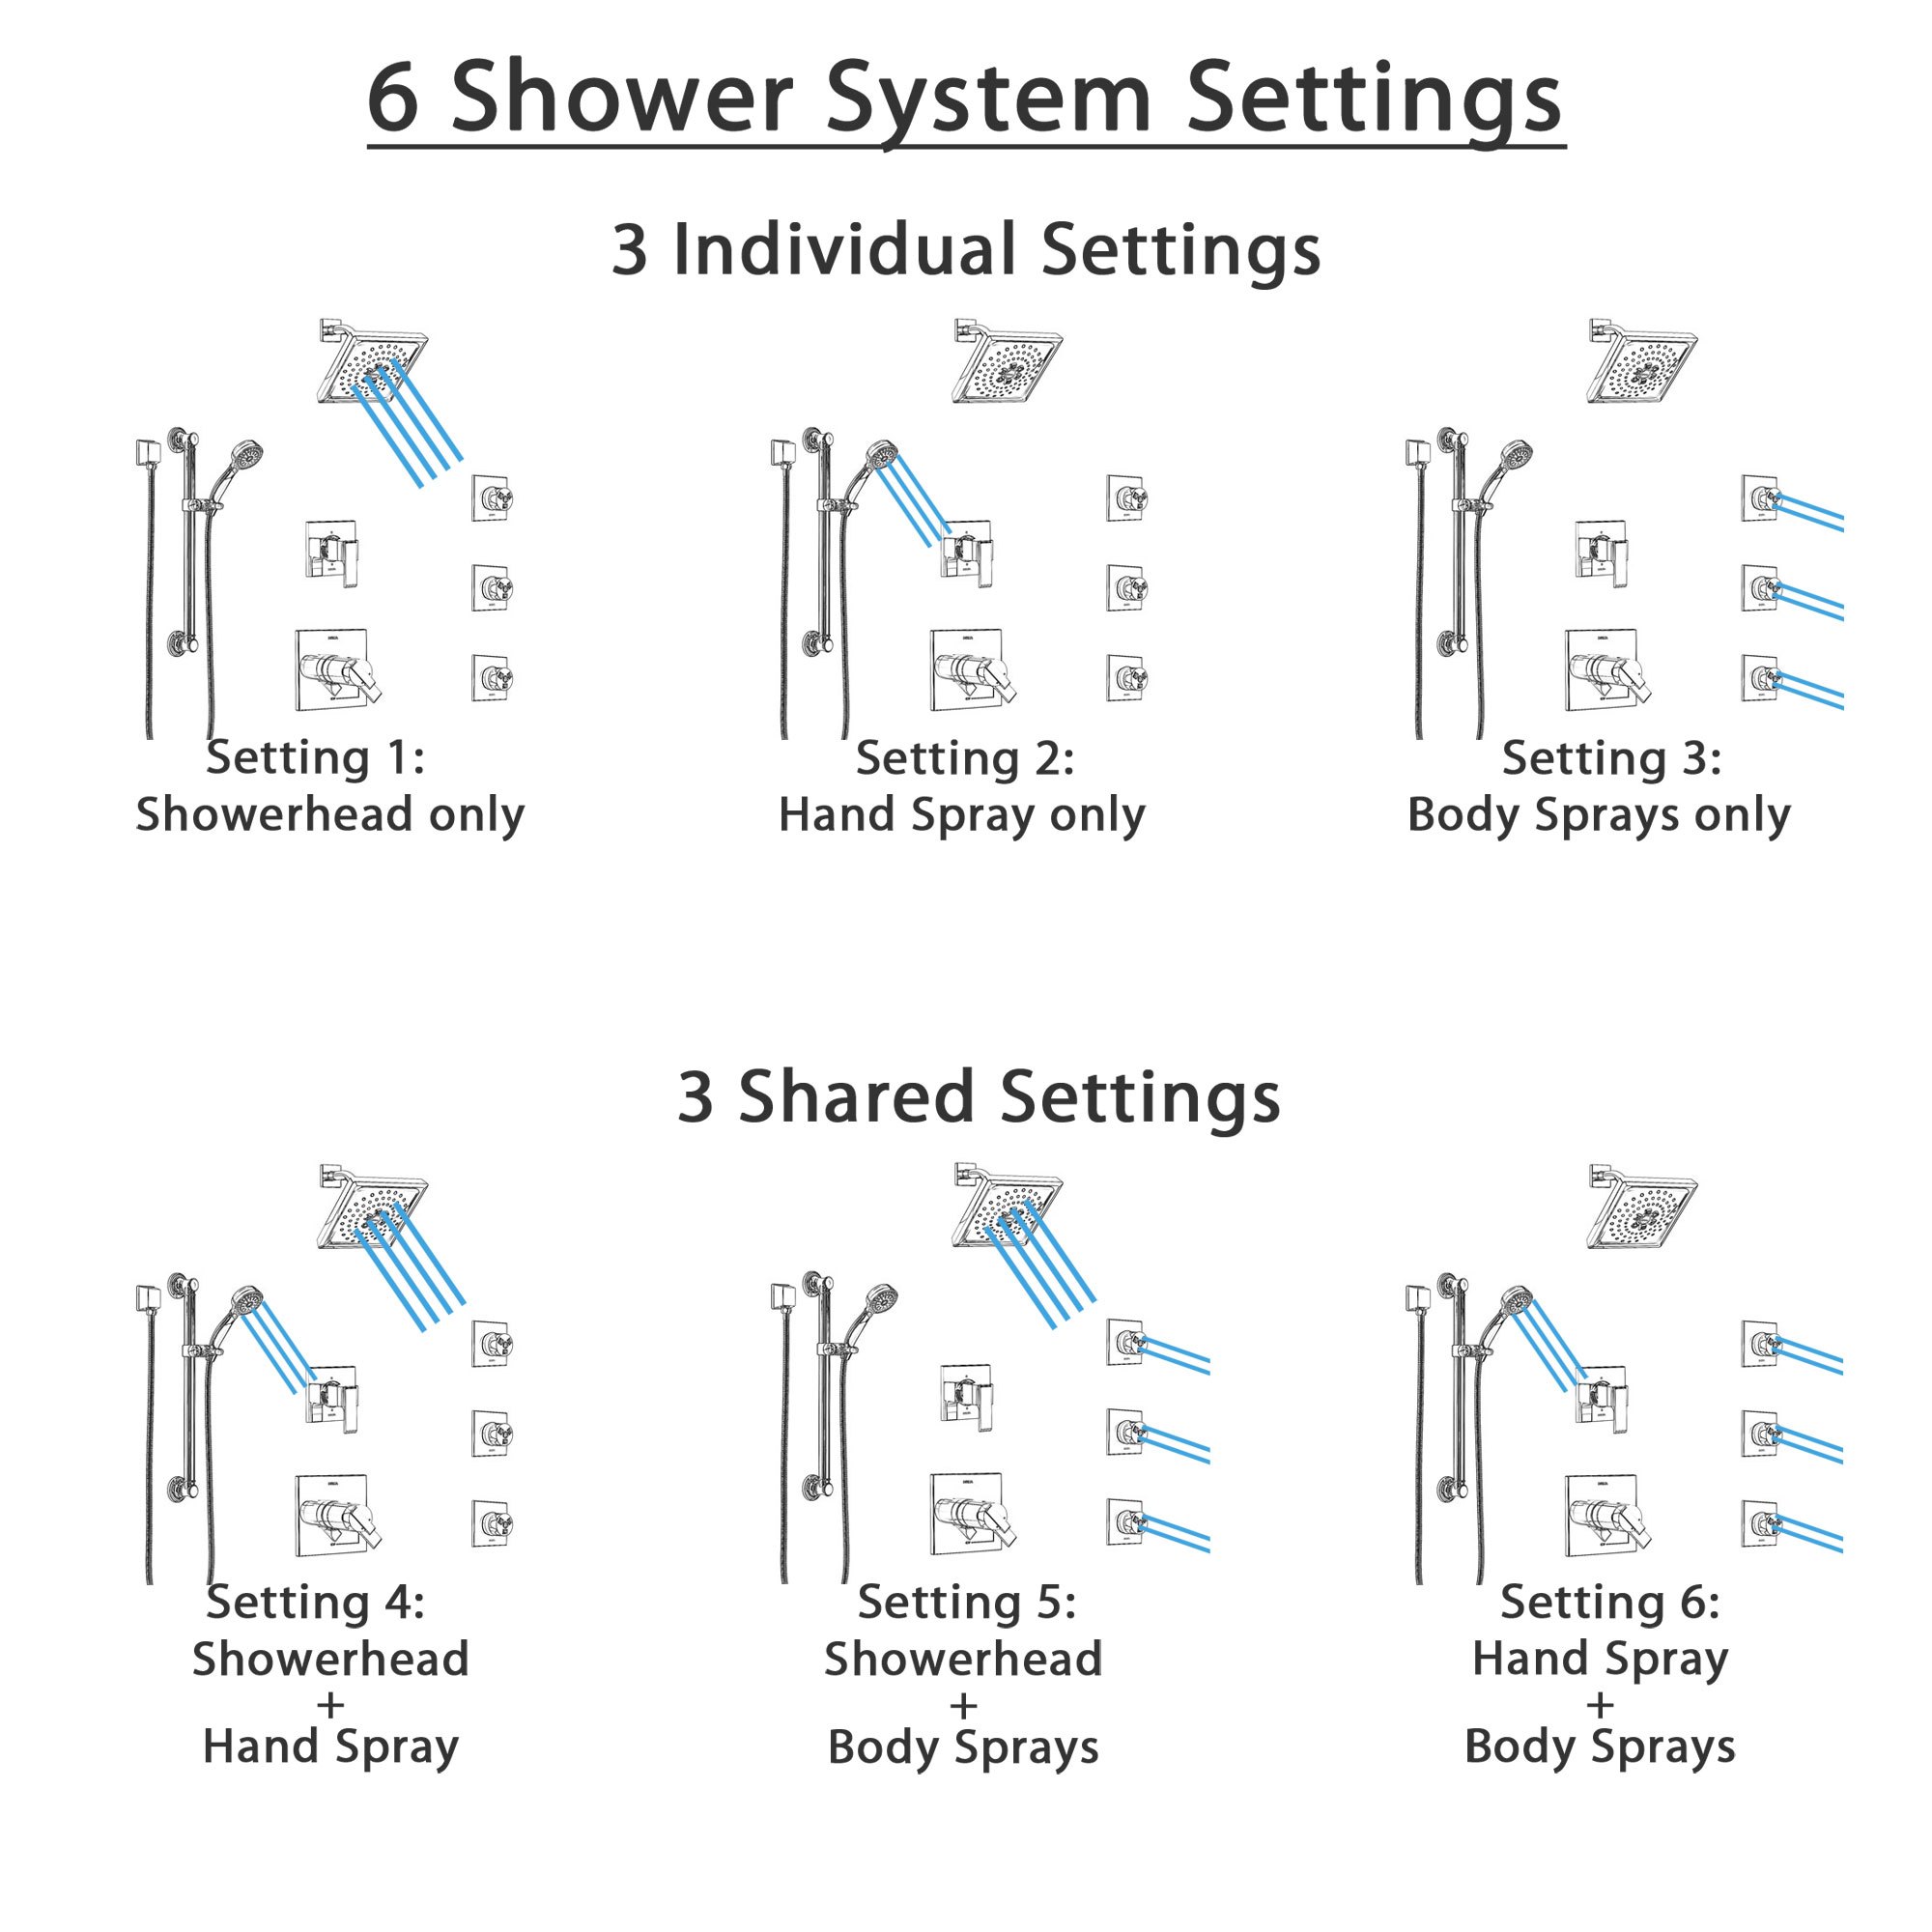 Function Illustration Graphic for Shower Systems with Body Sprays, Showerhead, and Hand Shower Settings